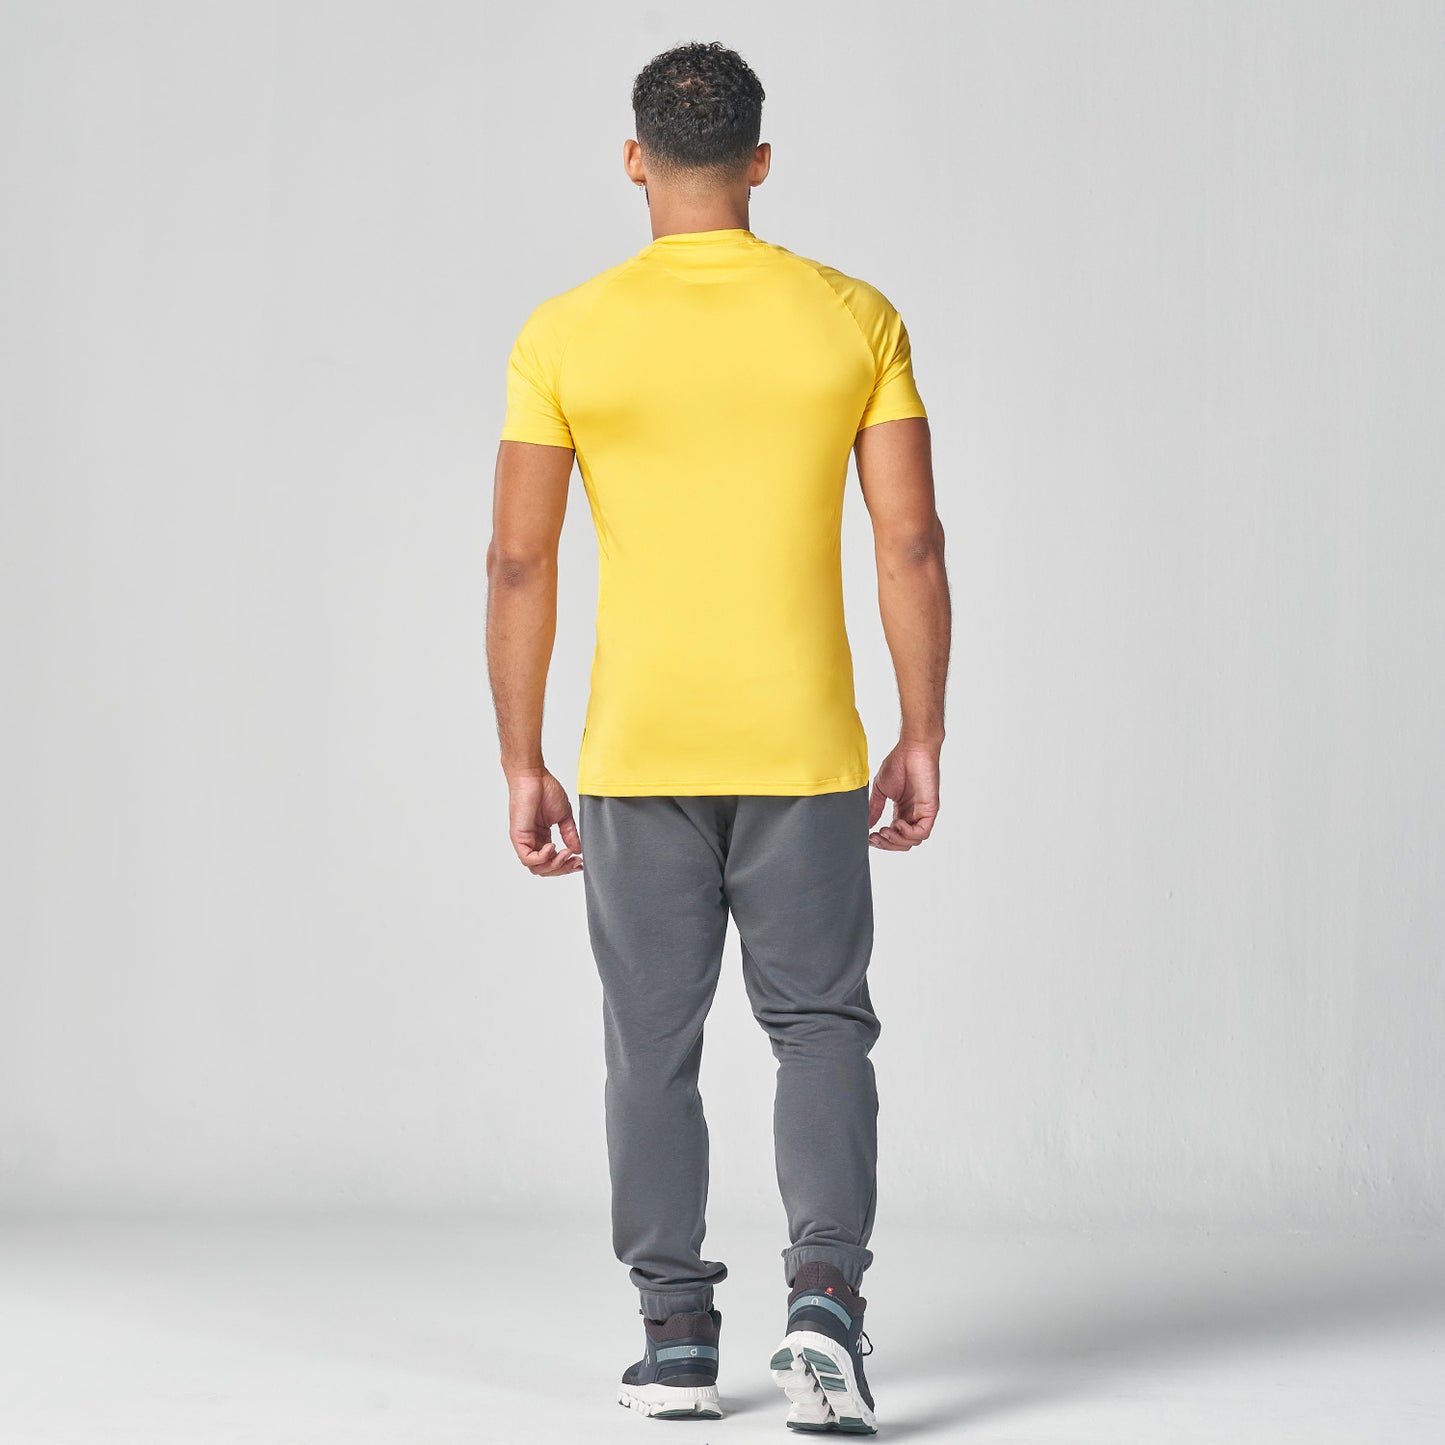 squatwolf-gym-wear-essential-ultralight-gym-tee-yellow-workout-shirts-for-men